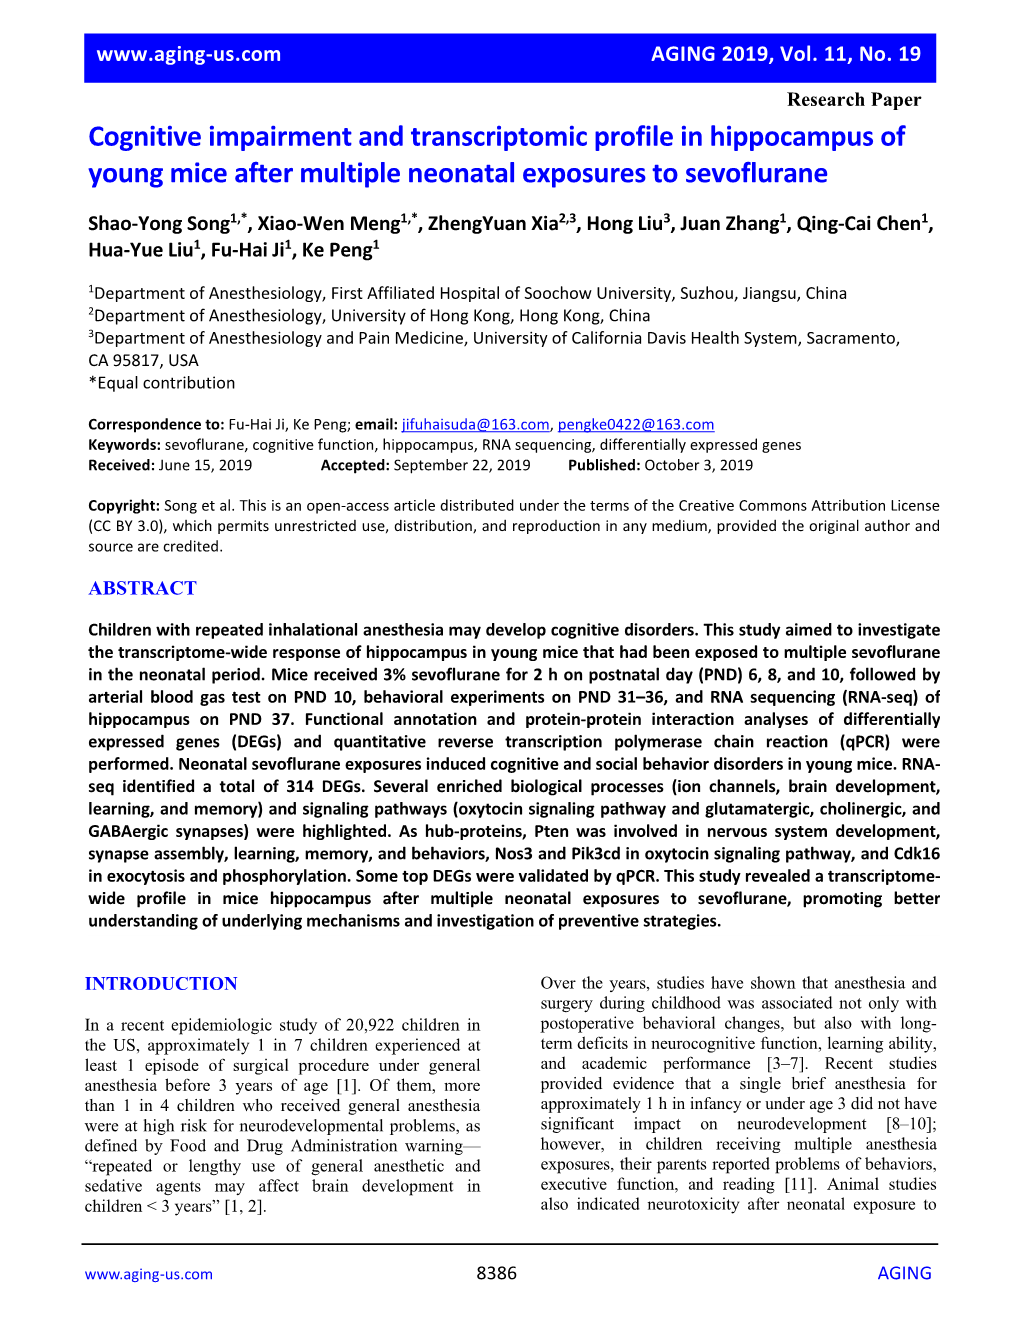 Cognitive Impairment and Transcriptomic Profile in Hippocampus of Young Mice After Multiple Neonatal Exposures to Sevoflurane